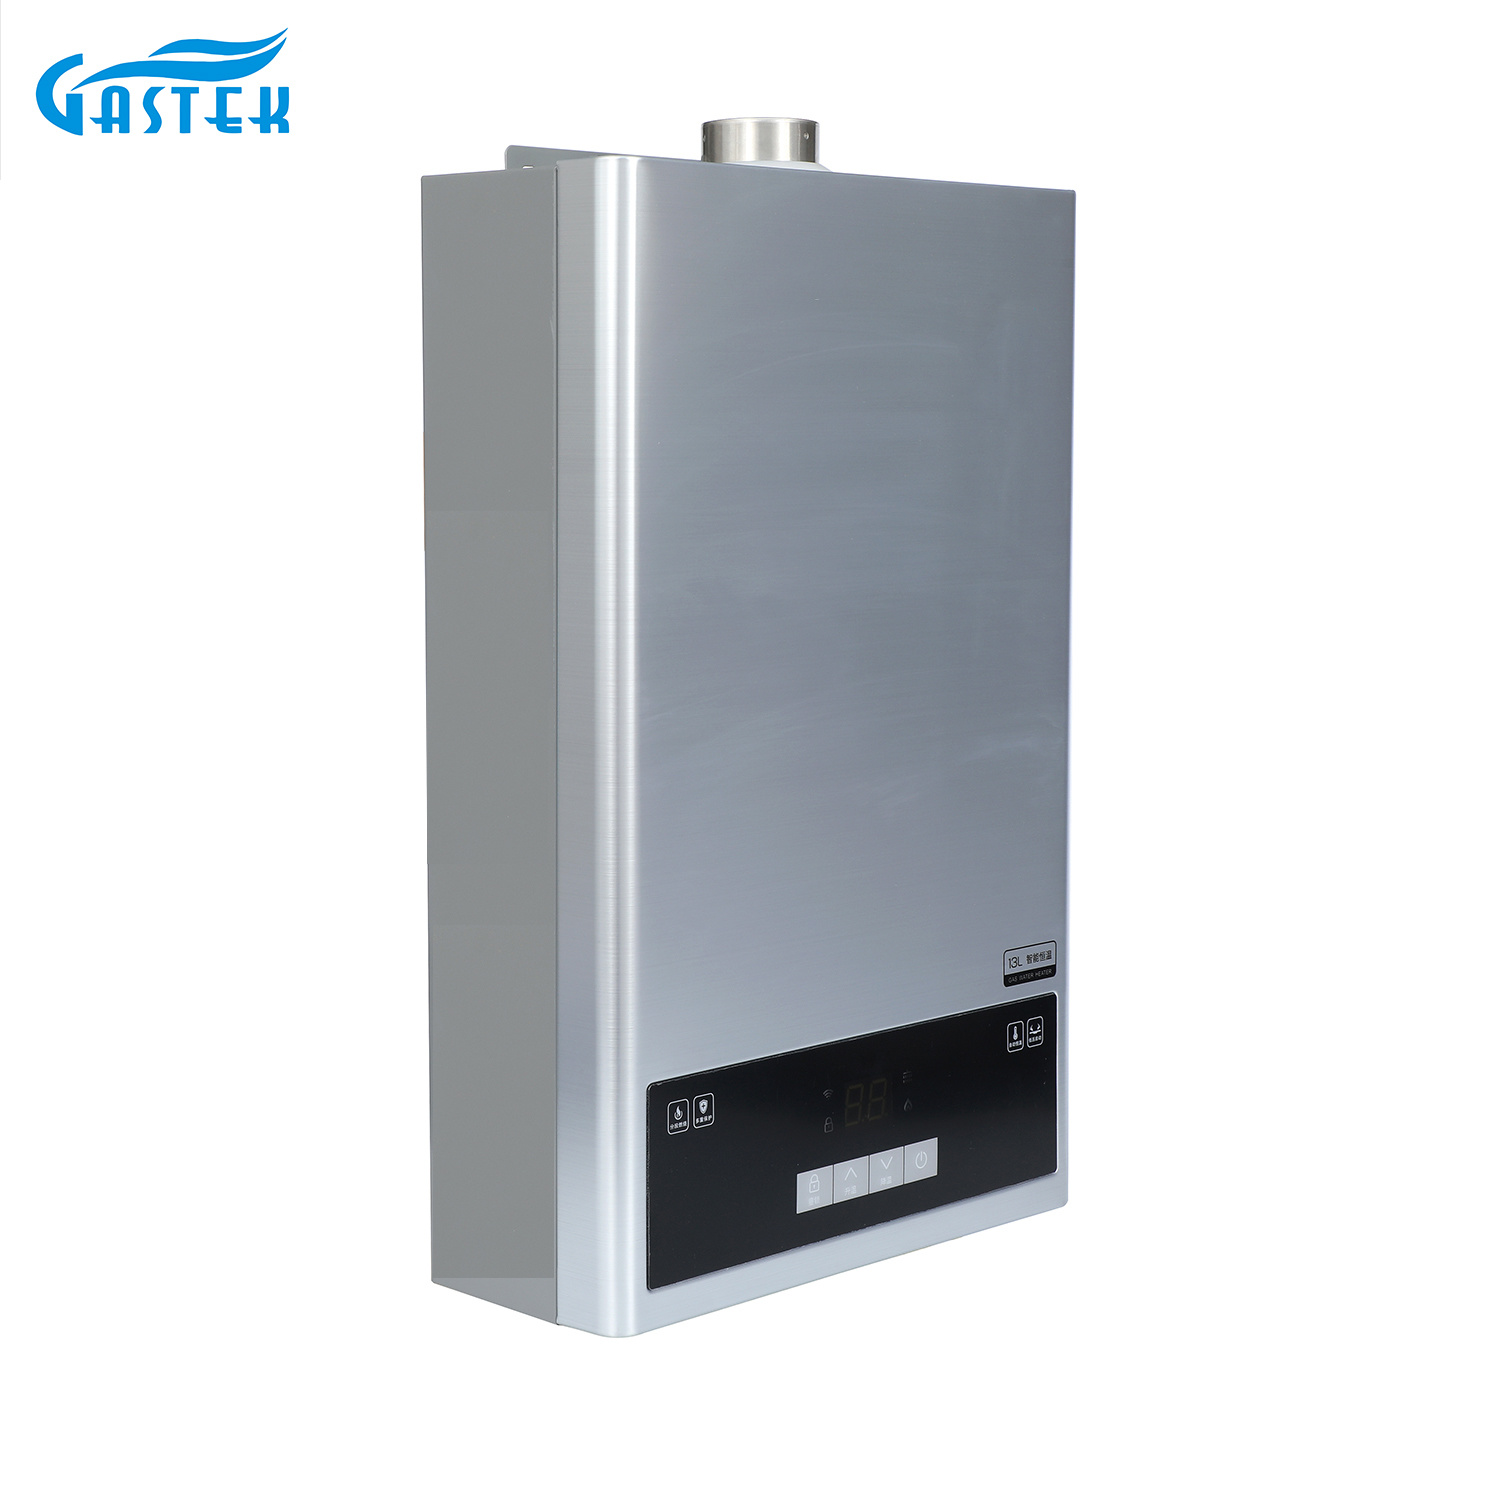 LCD Screen Display Constant Temperature Balanced Type Tankless Gas Water Heater for Bathing